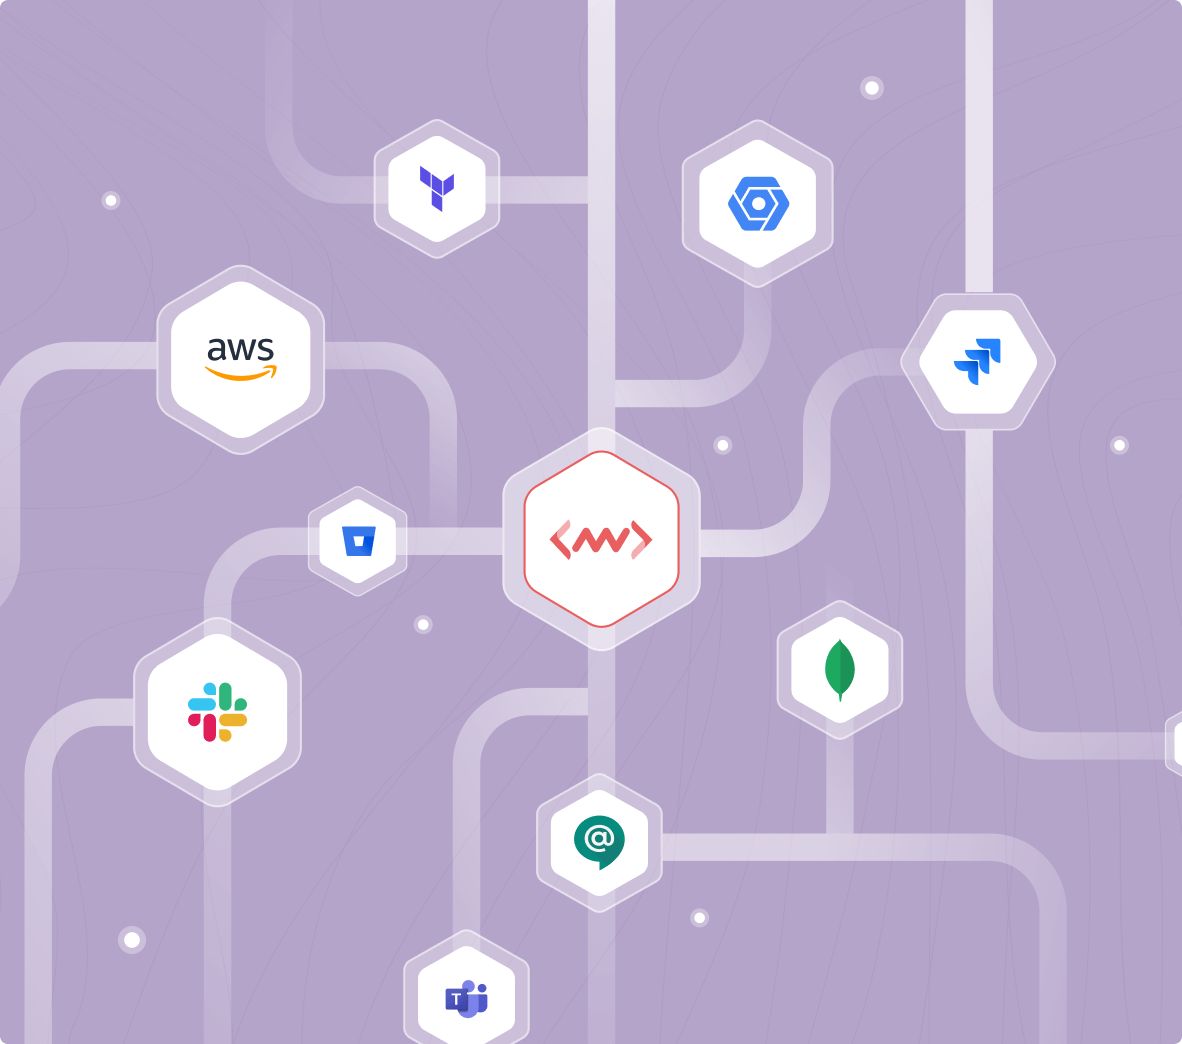 monitor your entire infrastructure with 50+ integrations -including AWS, Azure, GCP & more